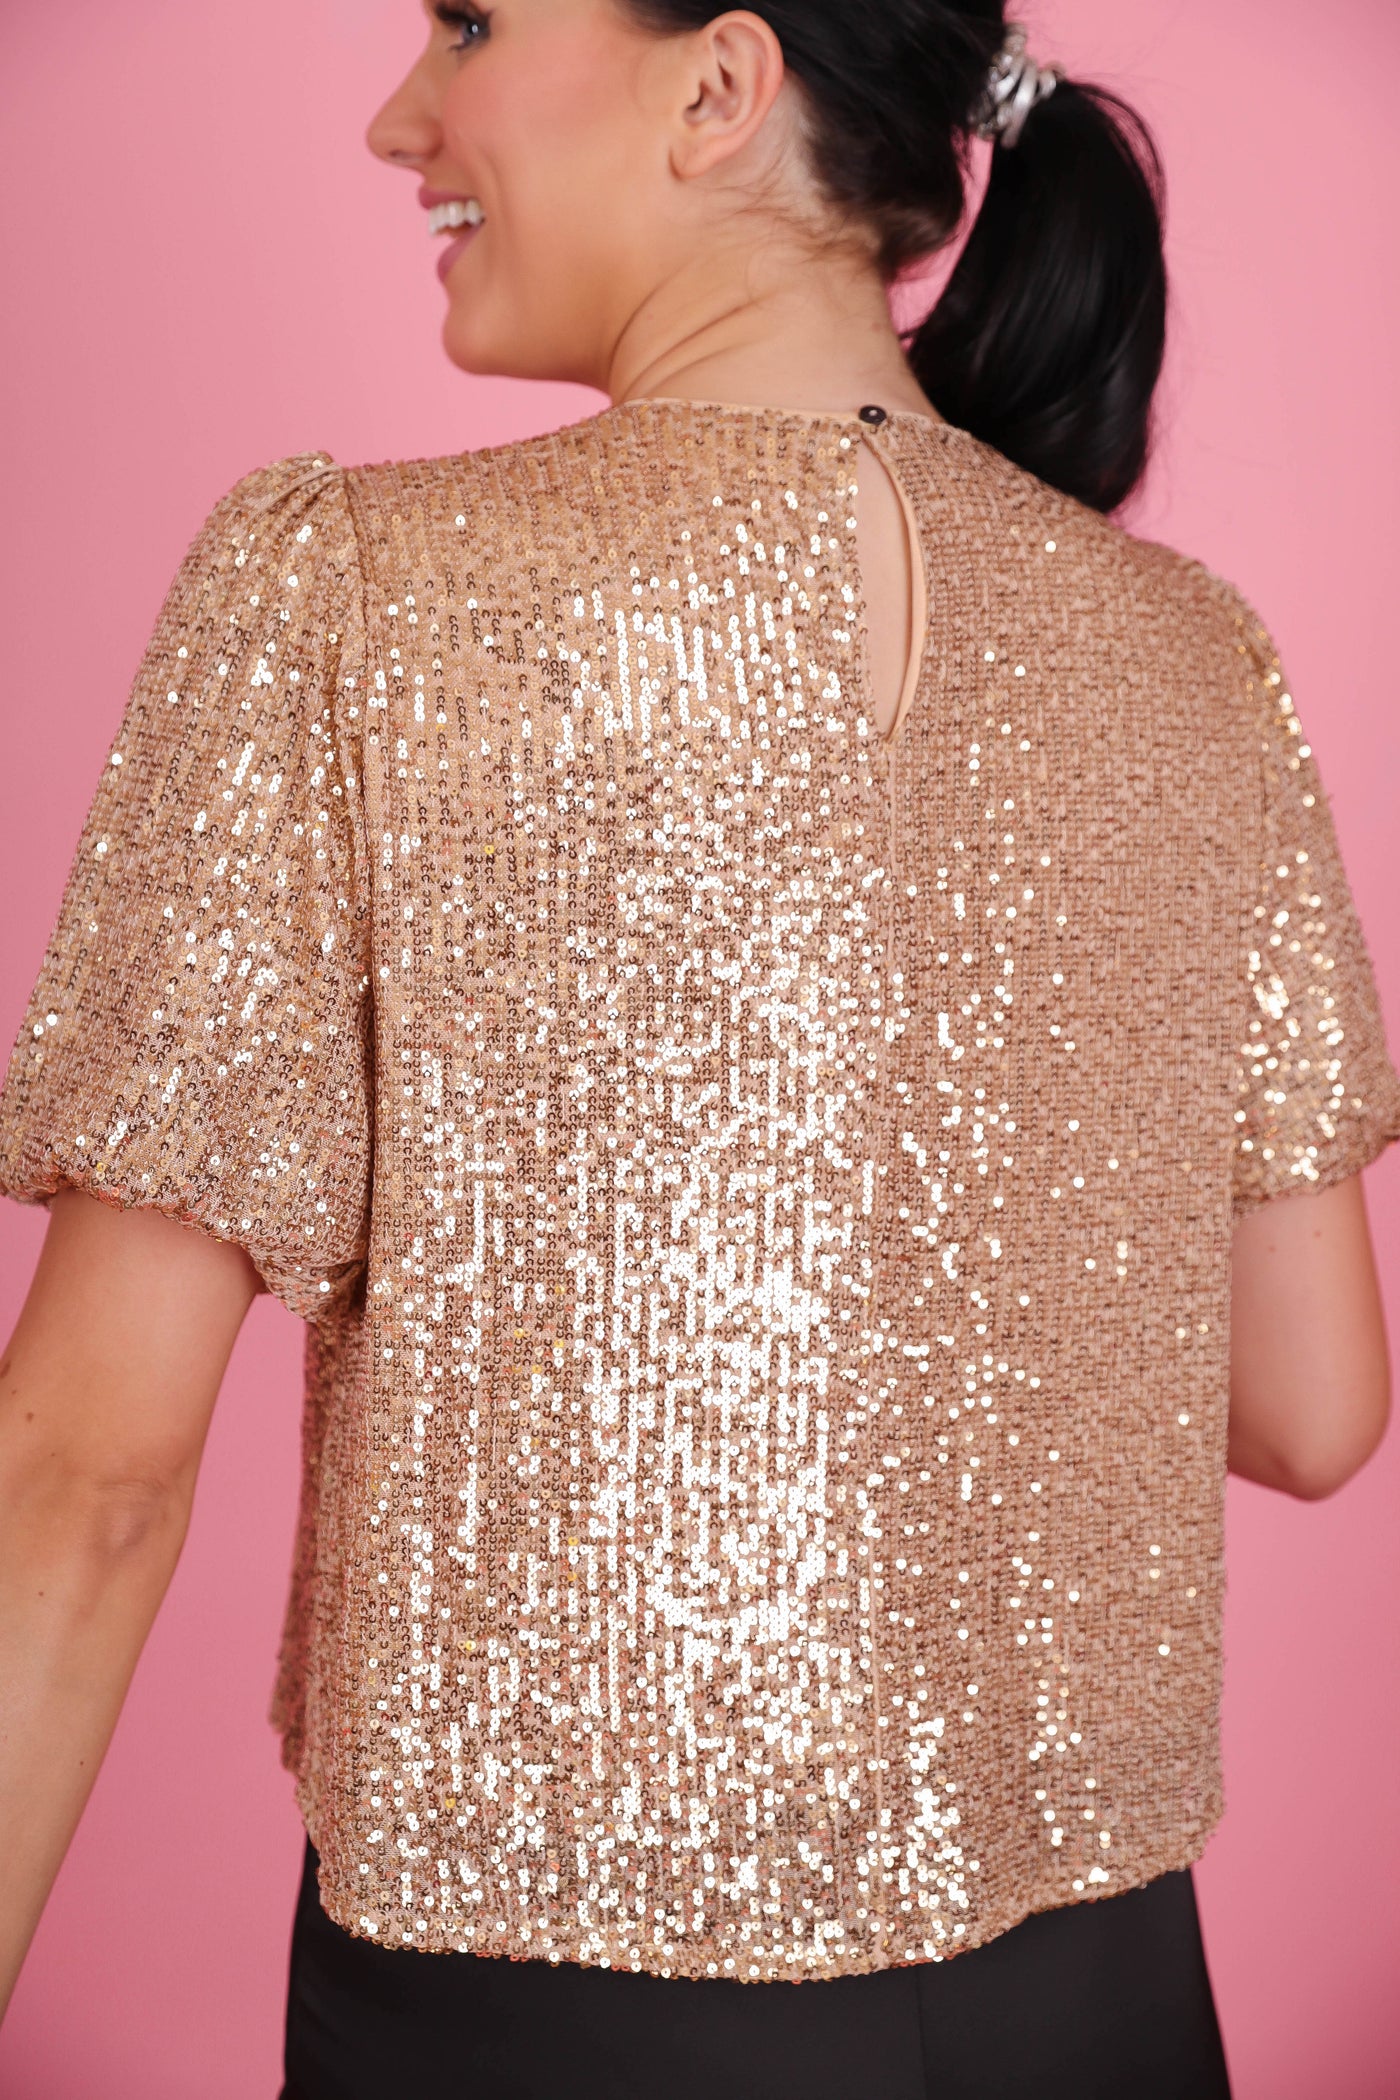 Women's Gold Sequin Blouse- Women's Holiday Tops- She + Sky Sequin Top